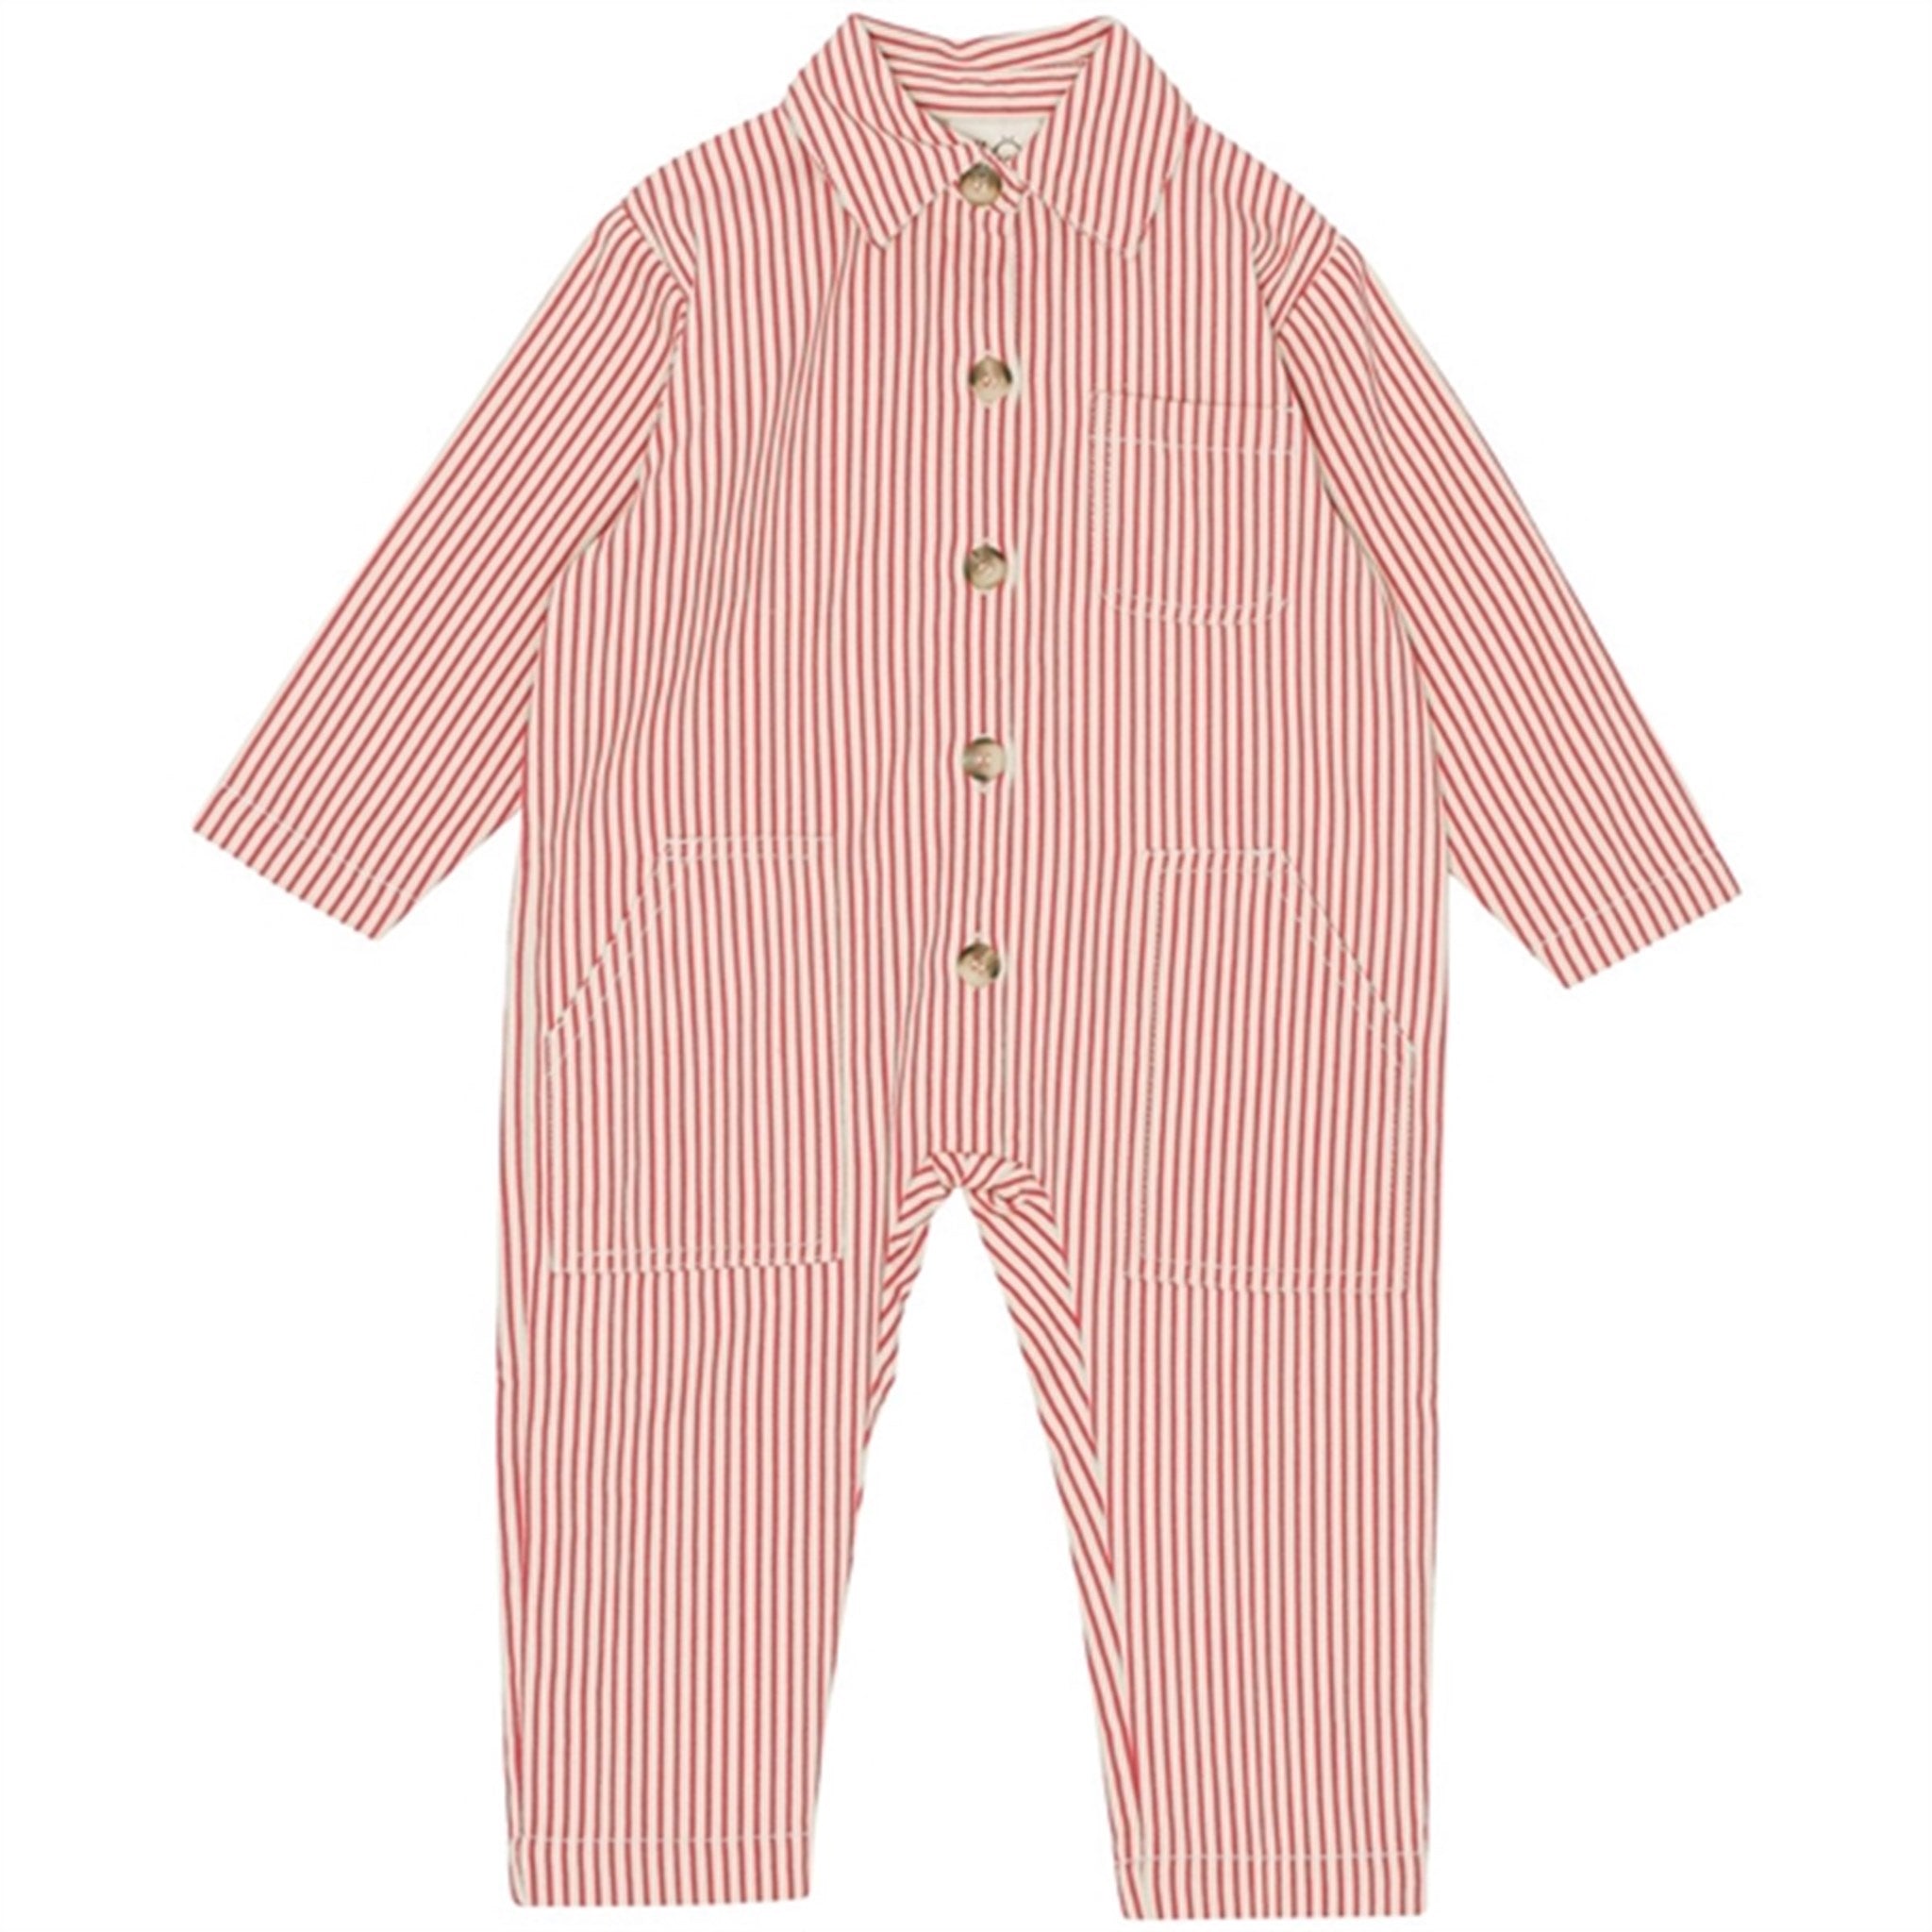 Flöss Max Overall Suit Scarlet Stripe